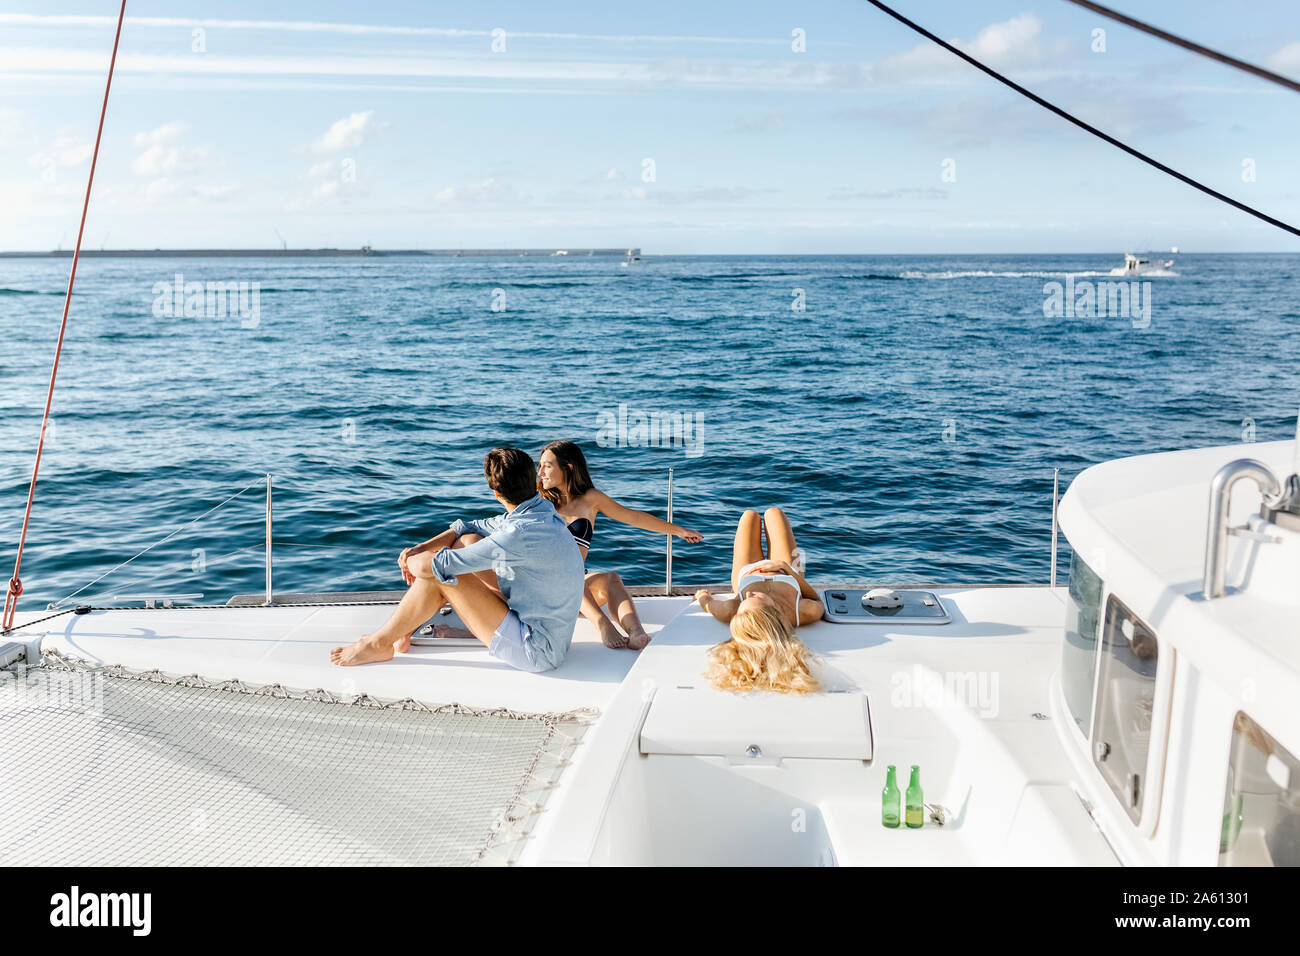 Three young friends enjoying a summer day on a sailboat Stock Photo